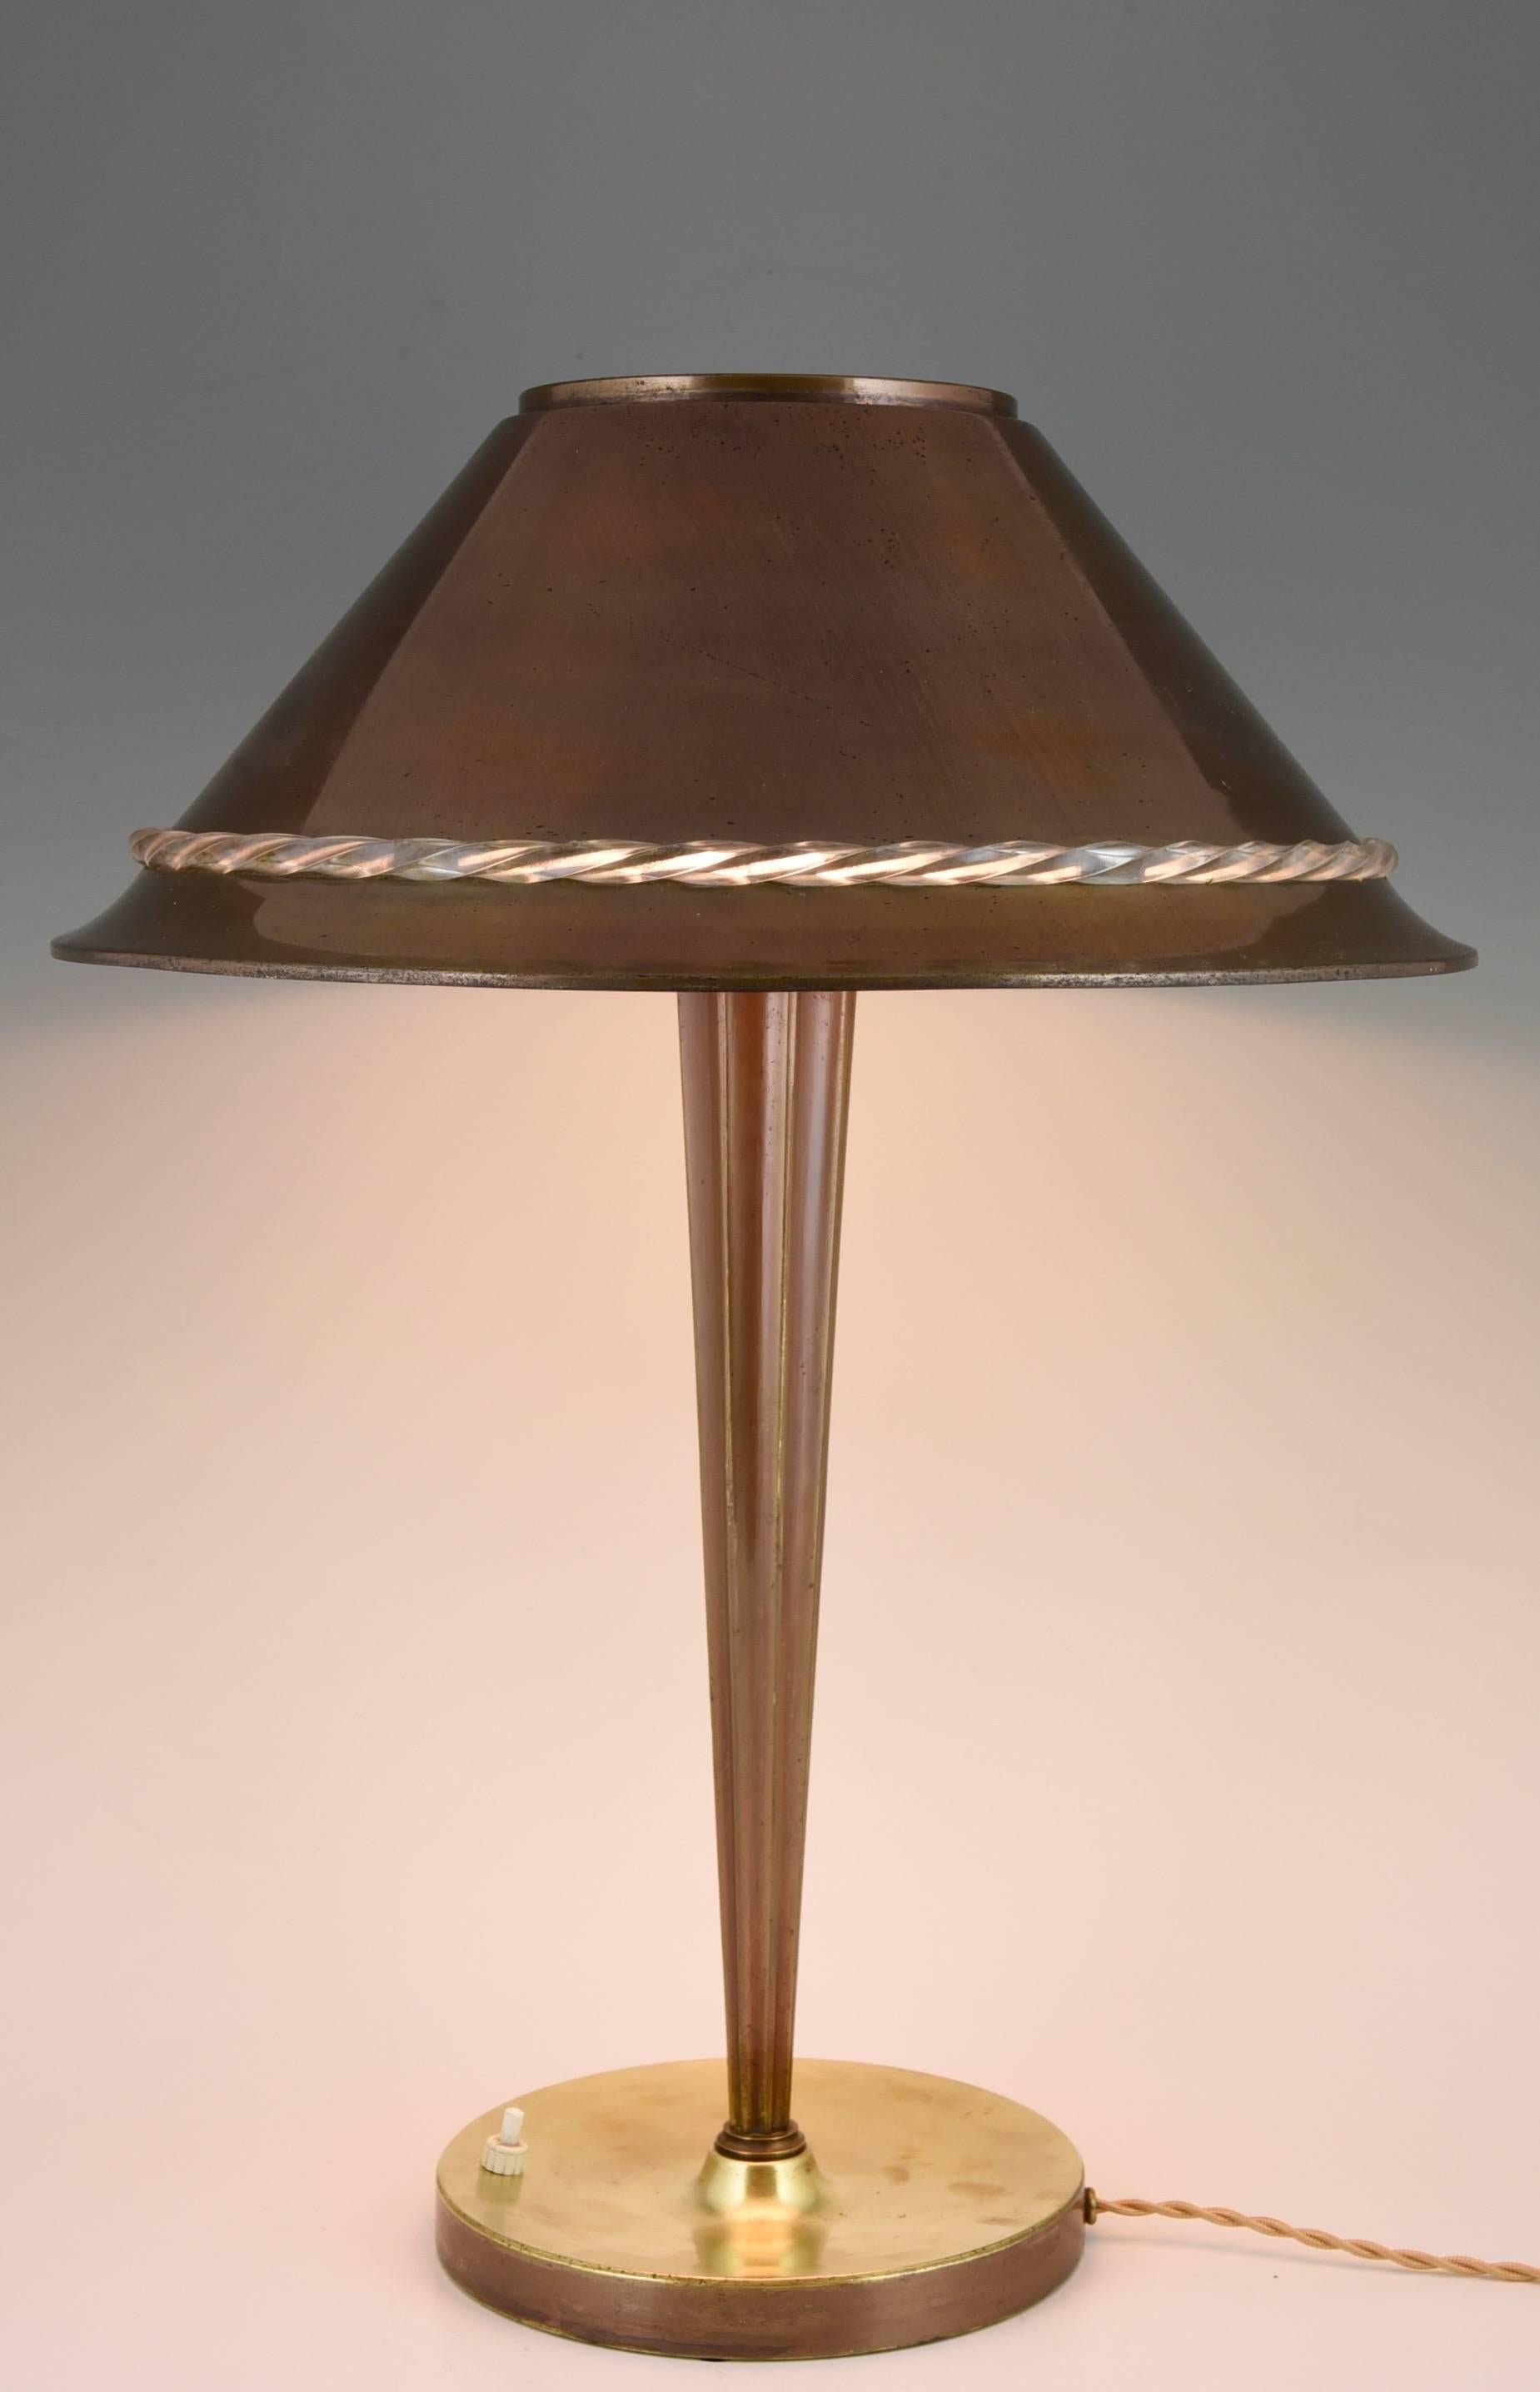 Description: French bronze, copper and glass table lamp by Jean Perzel with original purchase invoice of 1954.
Designer: Ateliers Jean Perzel.
Signature: J. Perzel.
Date: 1954.
Material: Bronze, copper, glass.
Origin: France.
Size:
H 21.7